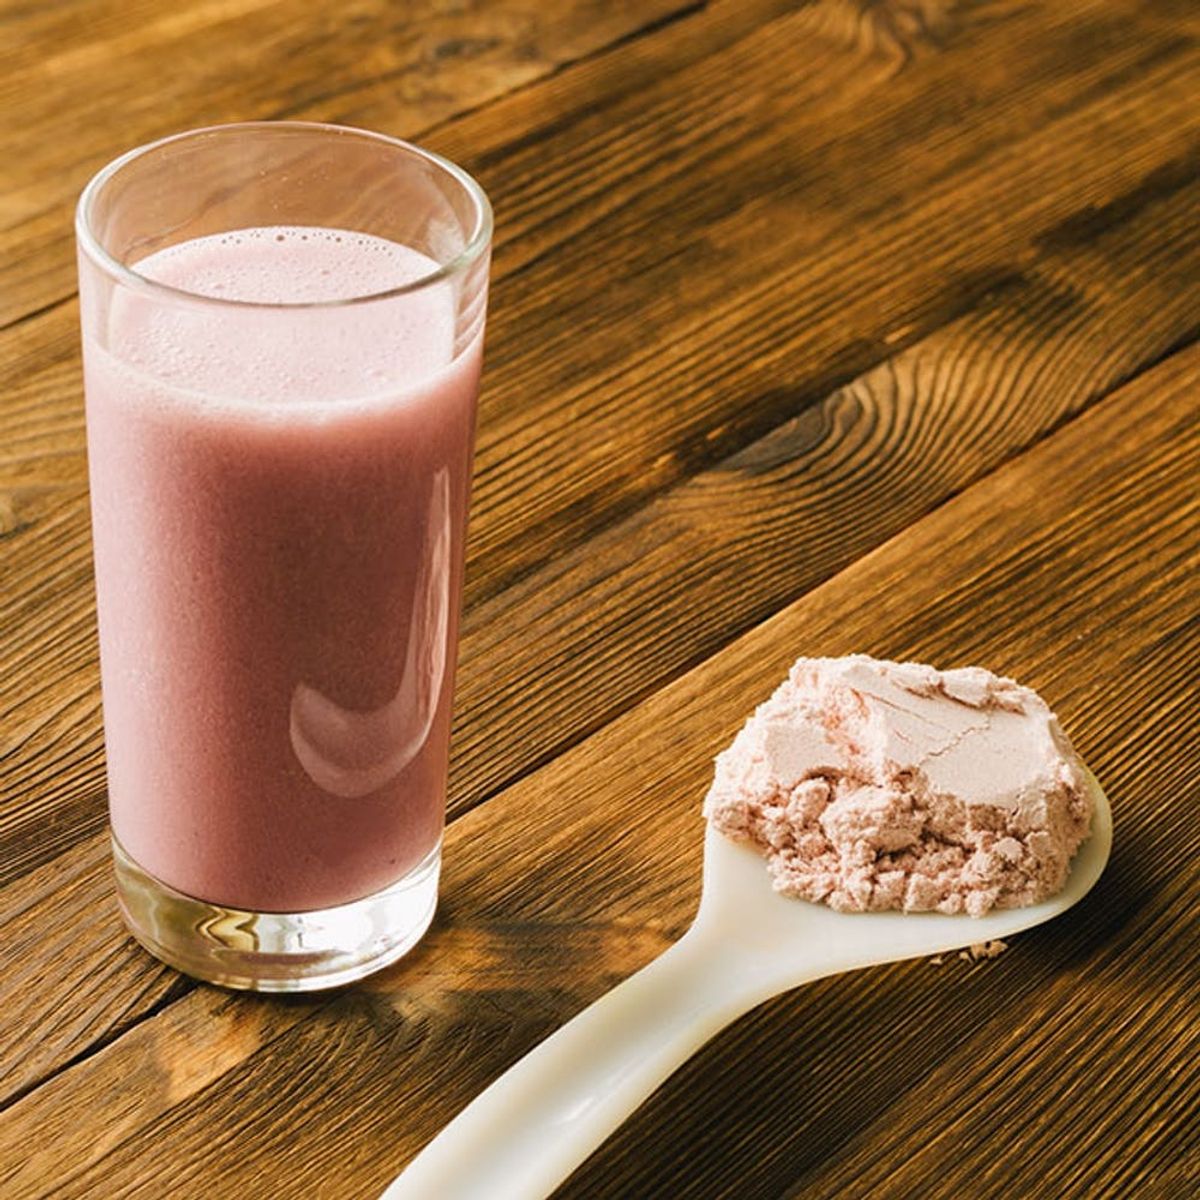 The Best Protein Powder for Every Type of Diet